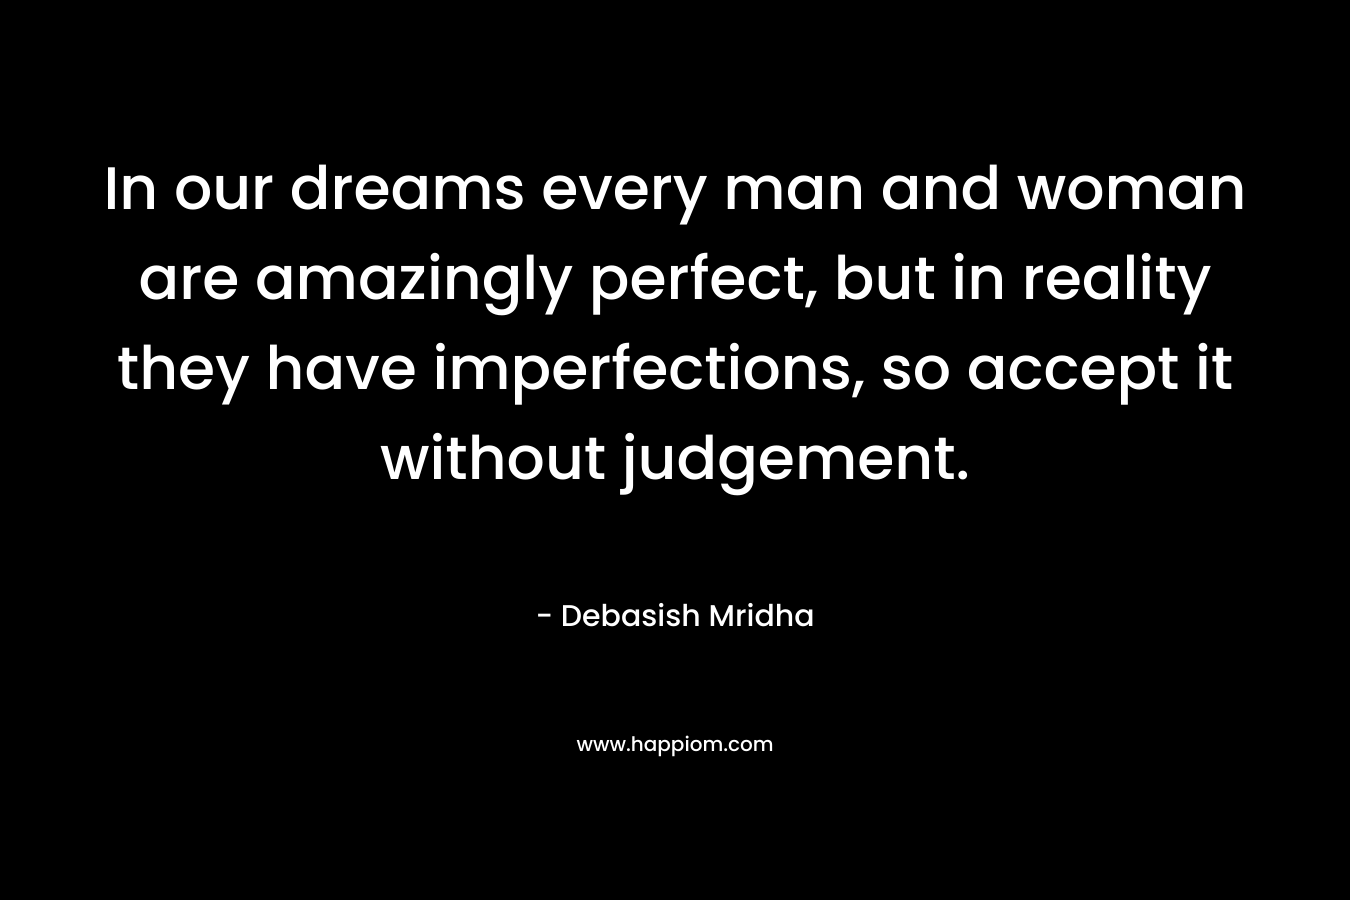 In our dreams every man and woman are amazingly perfect, but in reality they have imperfections, so accept it without judgement.